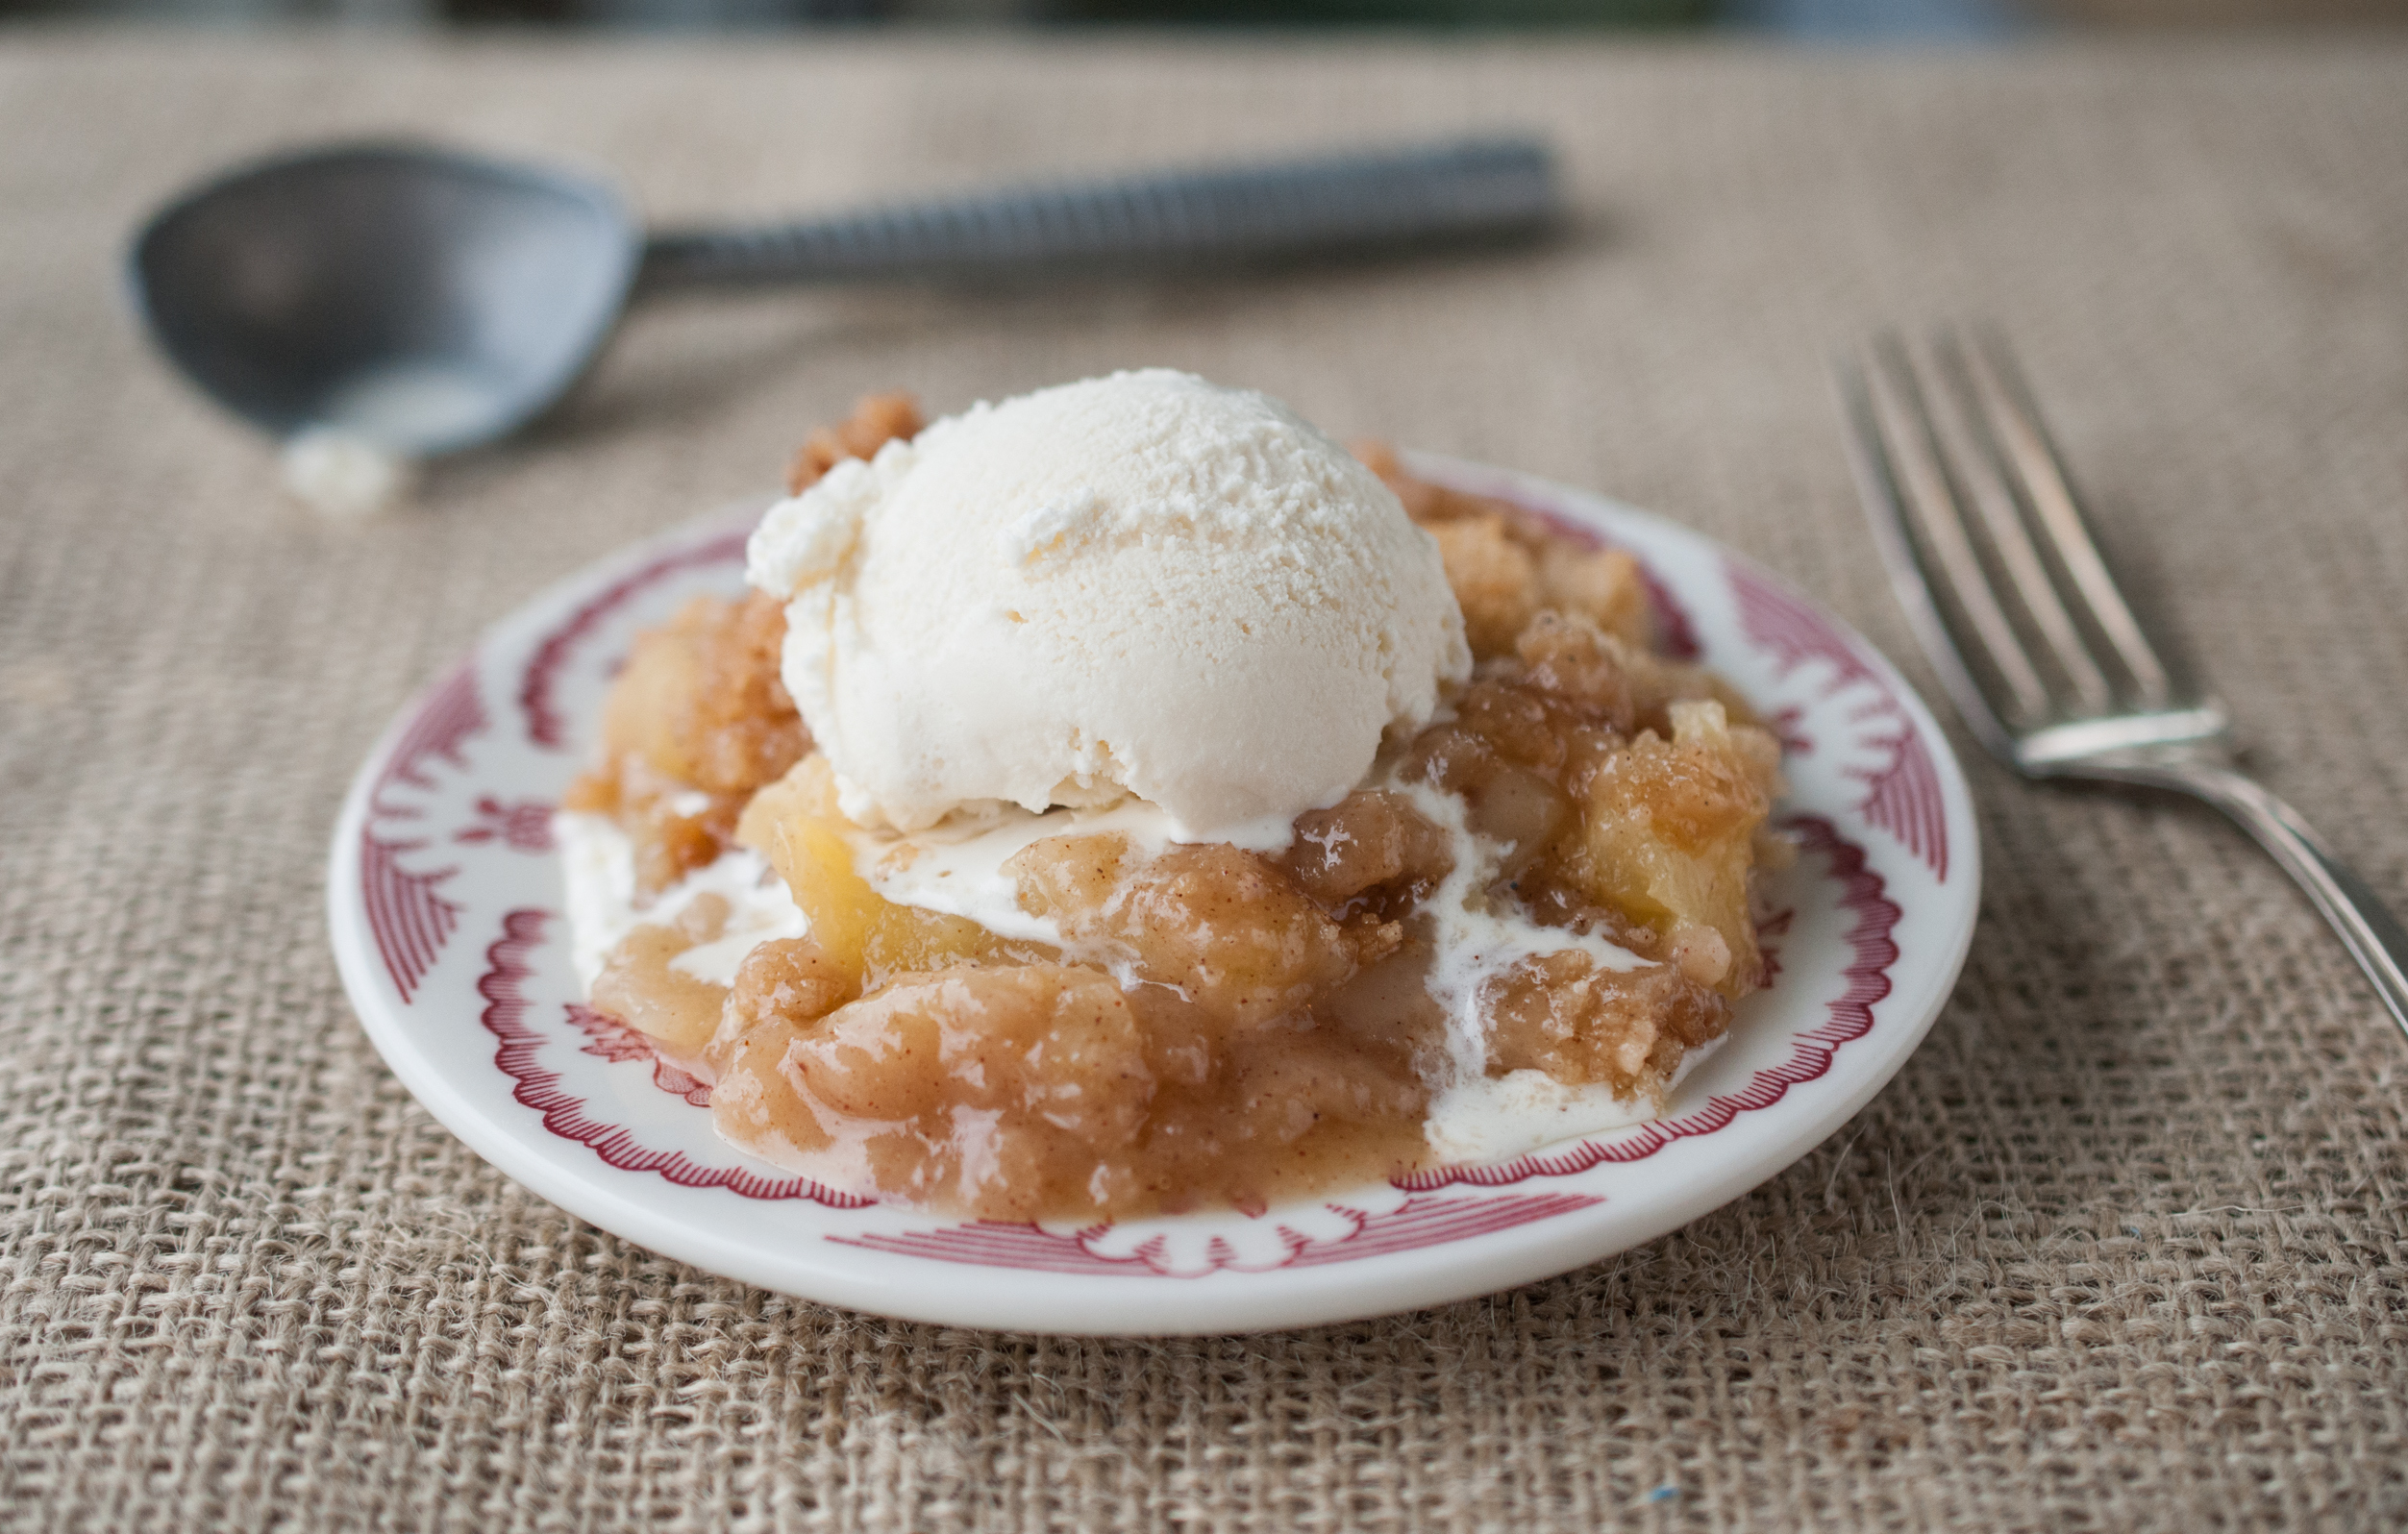 A plate of apple cobbler topped with a scoop of vanilla ice cream, with a spoon on the side